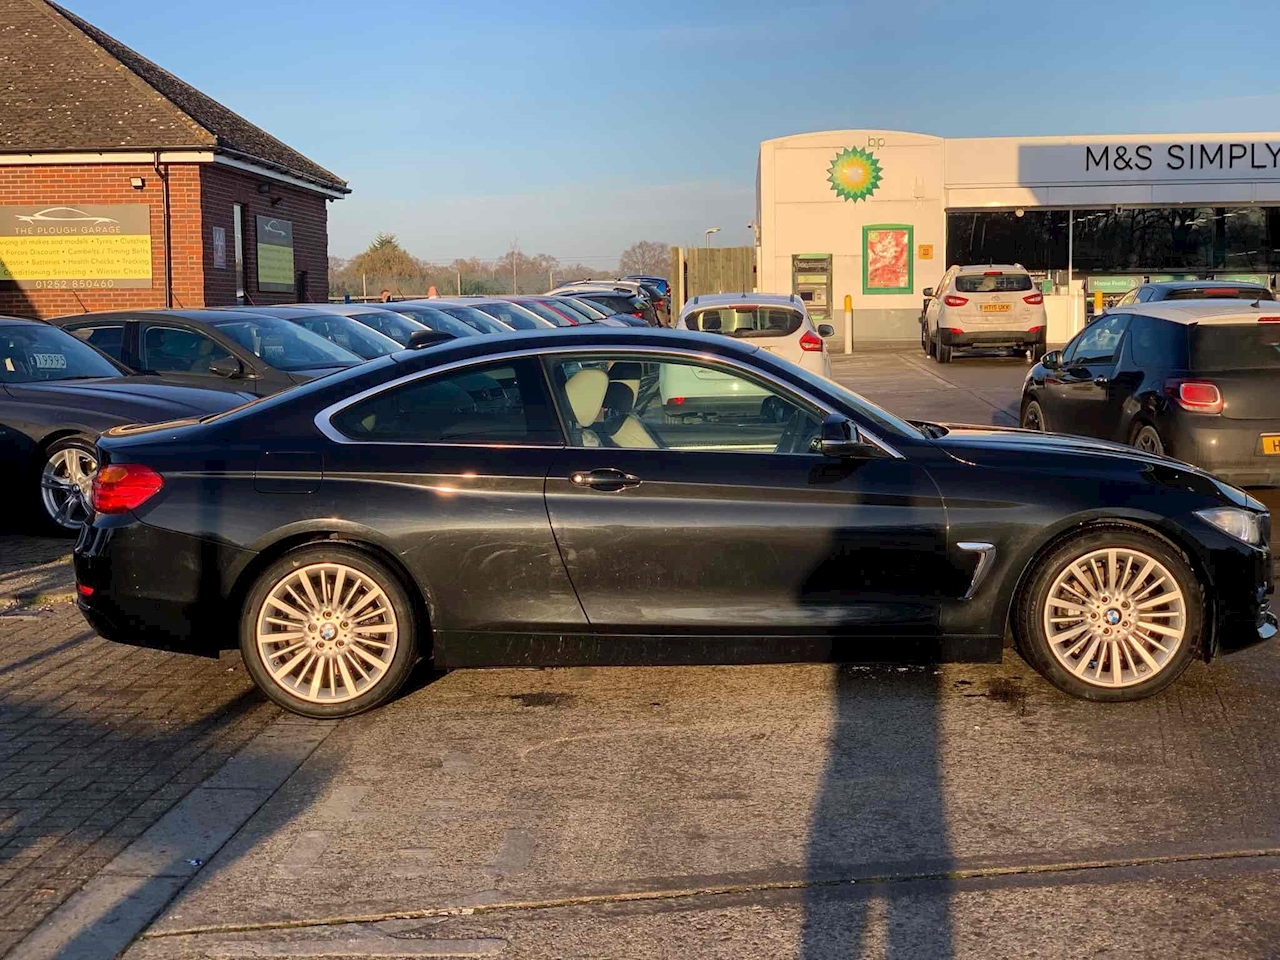 430d Luxury Coupe 3.0 Automatic Diesel